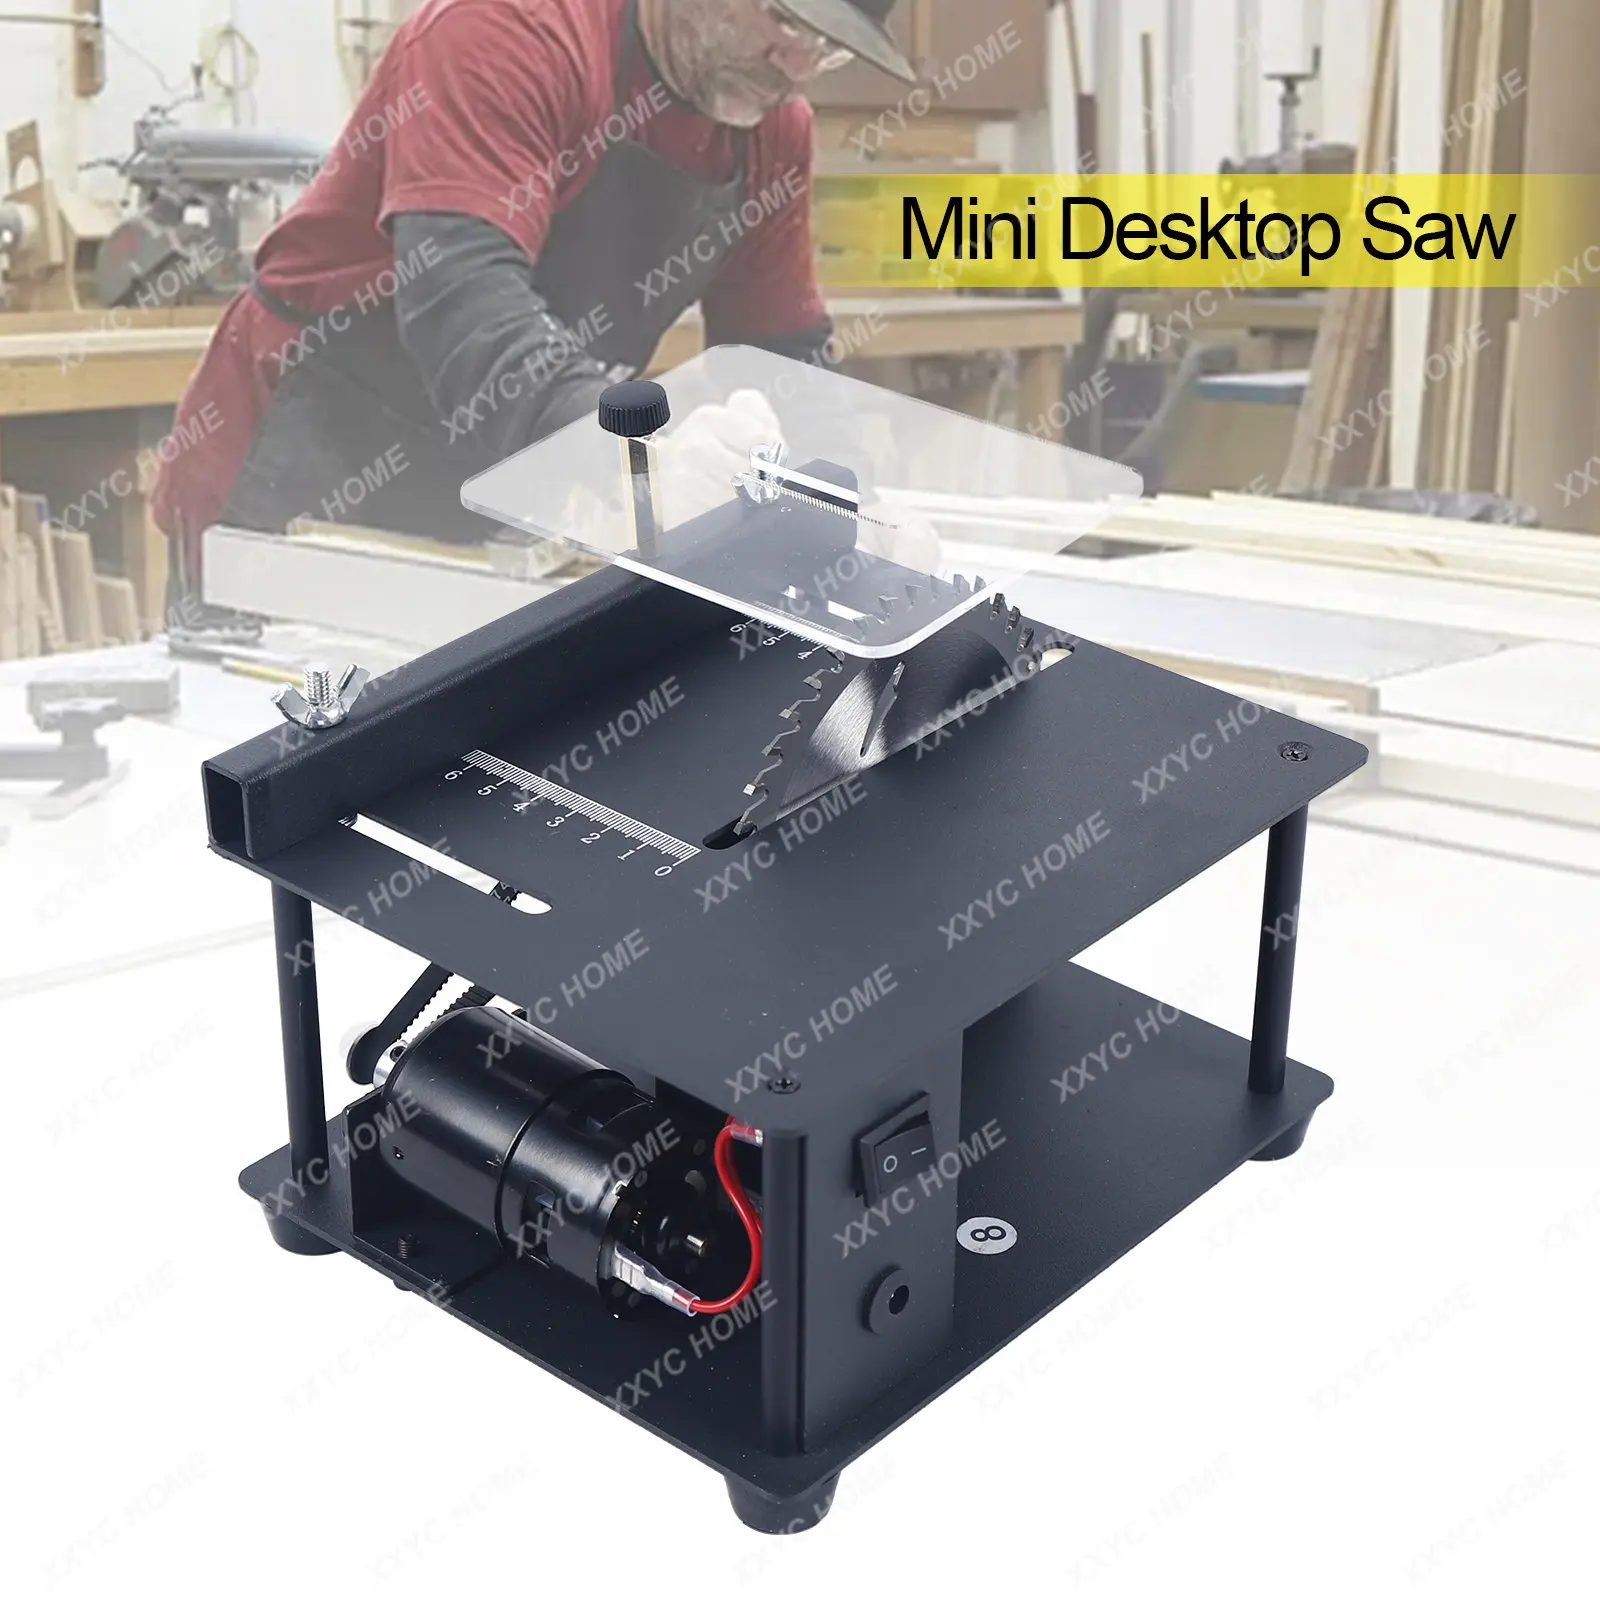 Small Sliding Table Saw: Discover the Power of Precision and Efficiency!